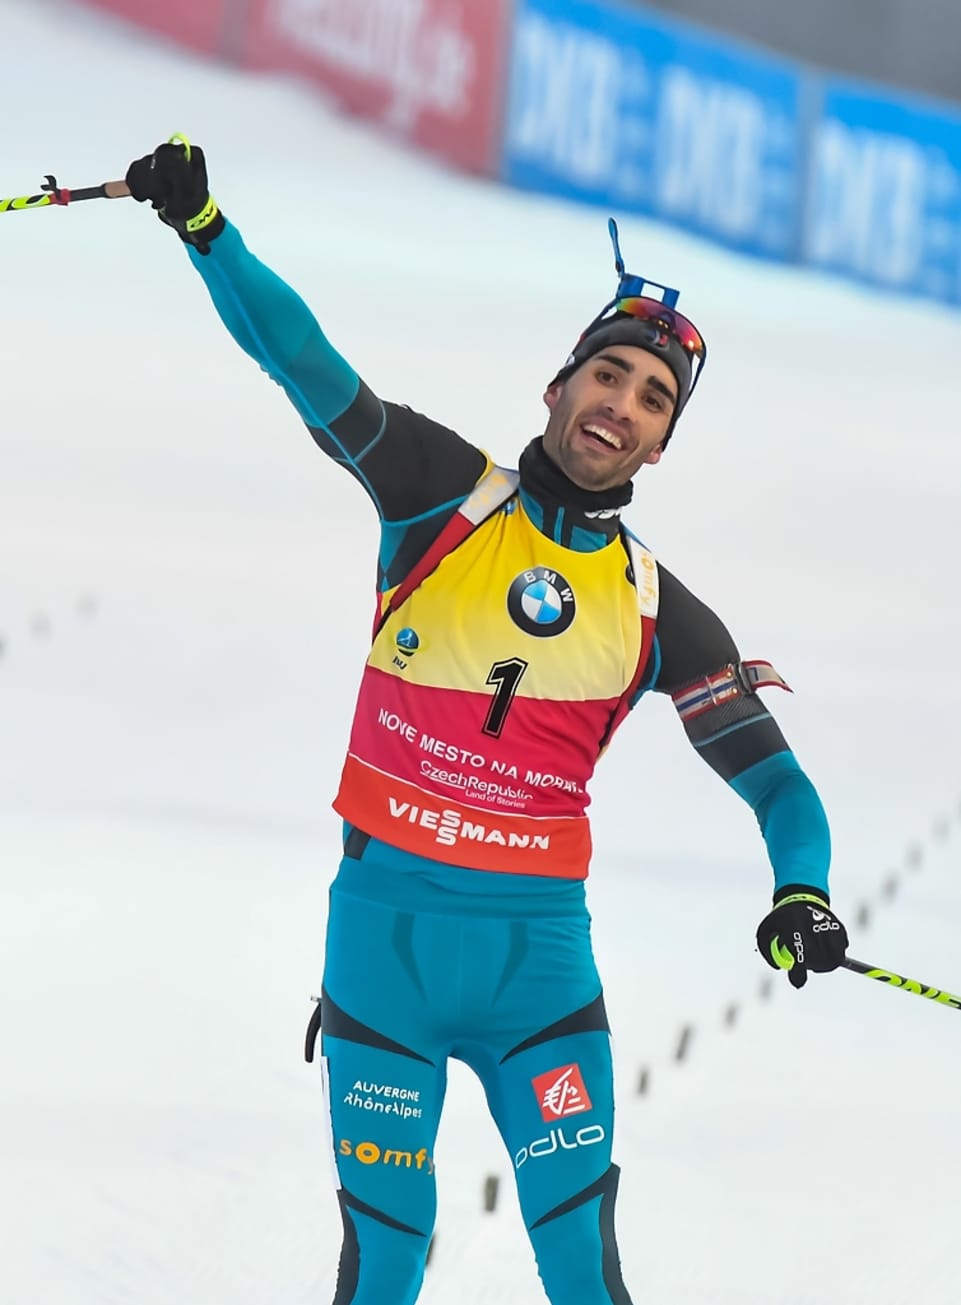 Martin Fourcade celebrating his 55th World Cup victory in Saturday's 12.5 k pursuit in Nove Mesto, Czech Republic, which he won by 30.2 seconds over Russia's Anton Shipulin. (Photo: IBU)